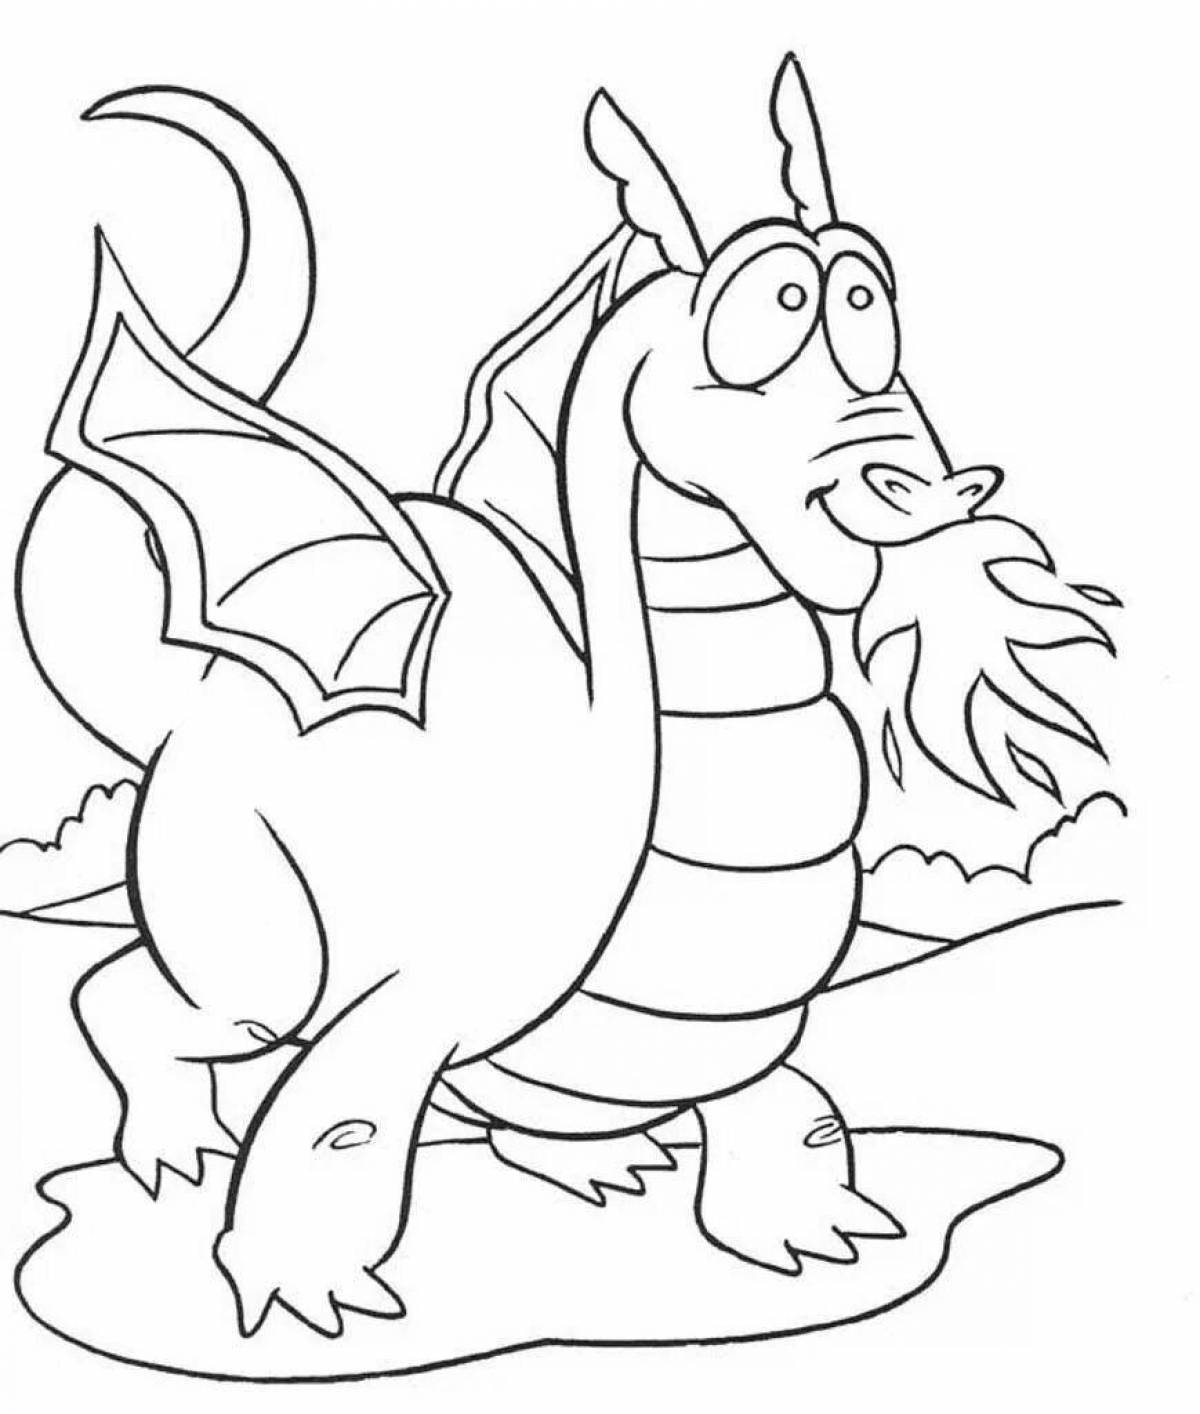 Major dragon coloring pages for 6-7 year olds